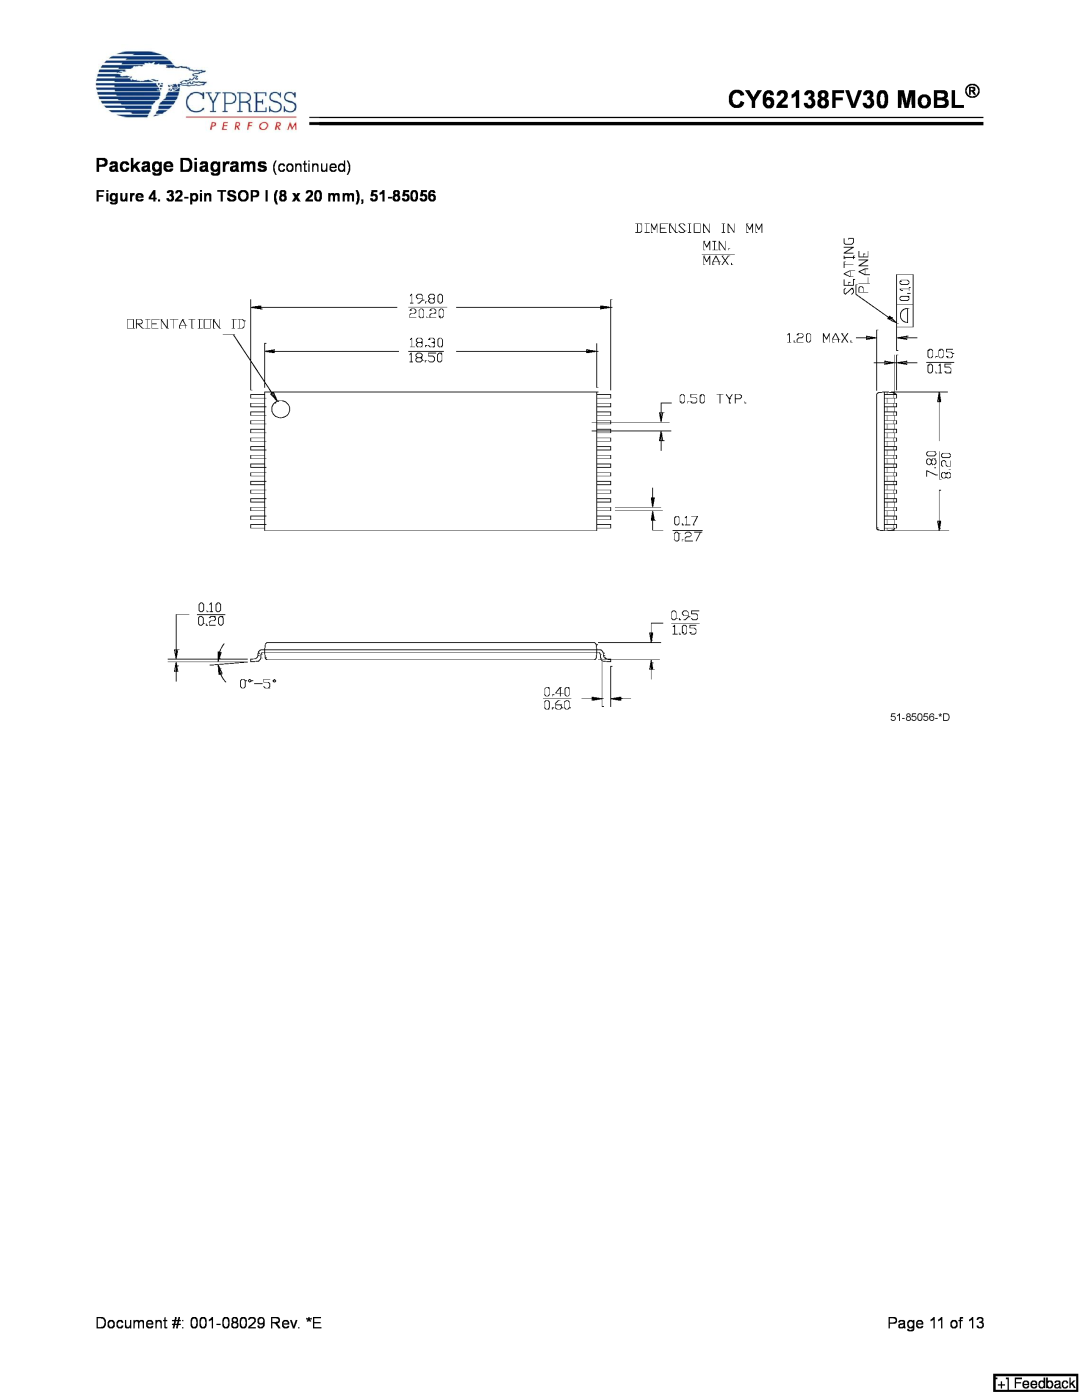 Cypress CY62138CV30 manual CY62138FV30 MoBL, Package Diagrams continued, 32-pin TSOP I 8 x 20 mm, Page 11 of, + Feedback 